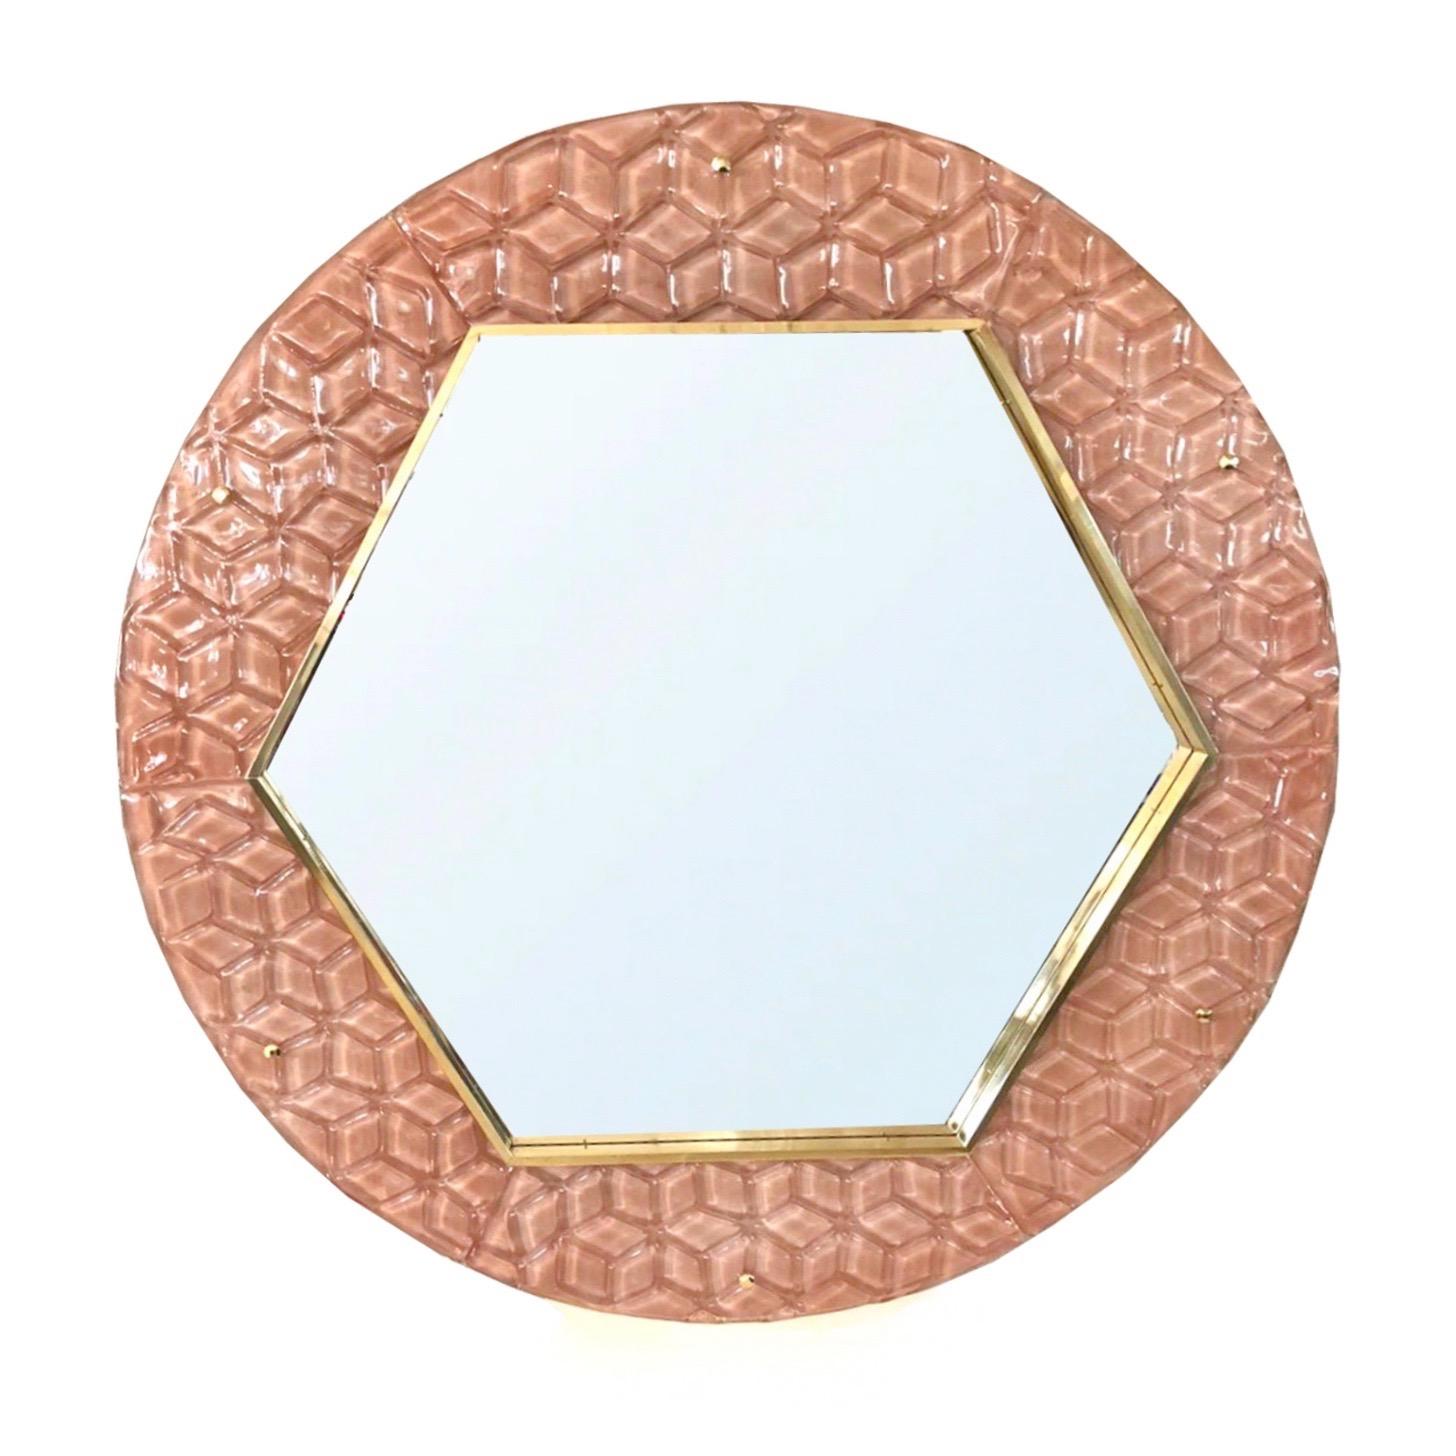 Bespoke Italian Custom Brass and Textured Pink Murano Glass Modern Round Mirror In New Condition For Sale In New York, NY